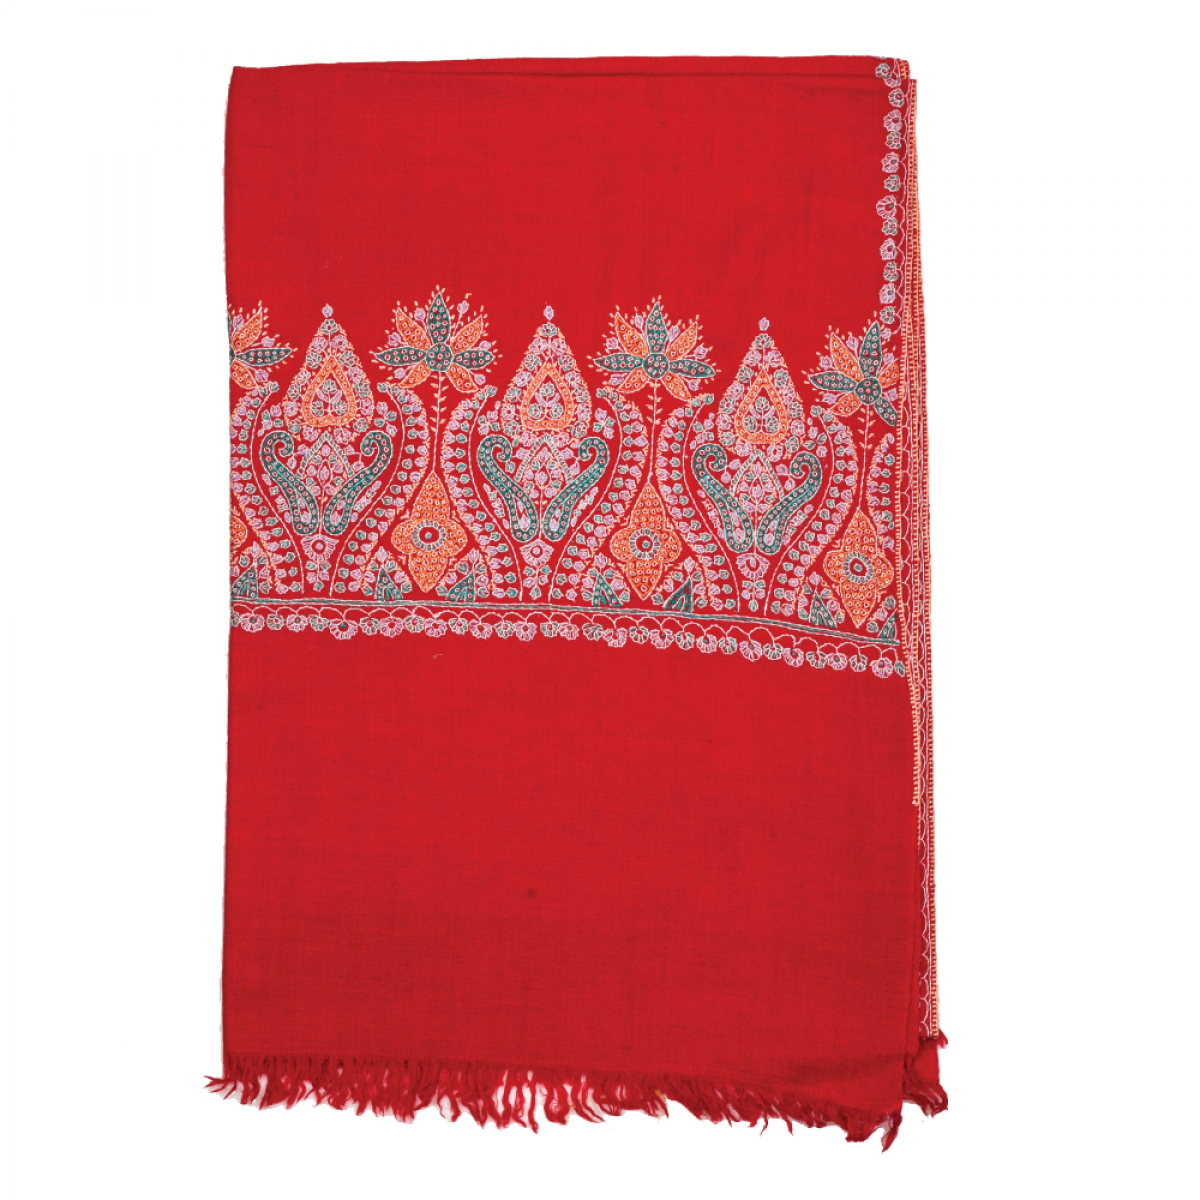 Embroidered Pashmina Stole - Radish Red & Green